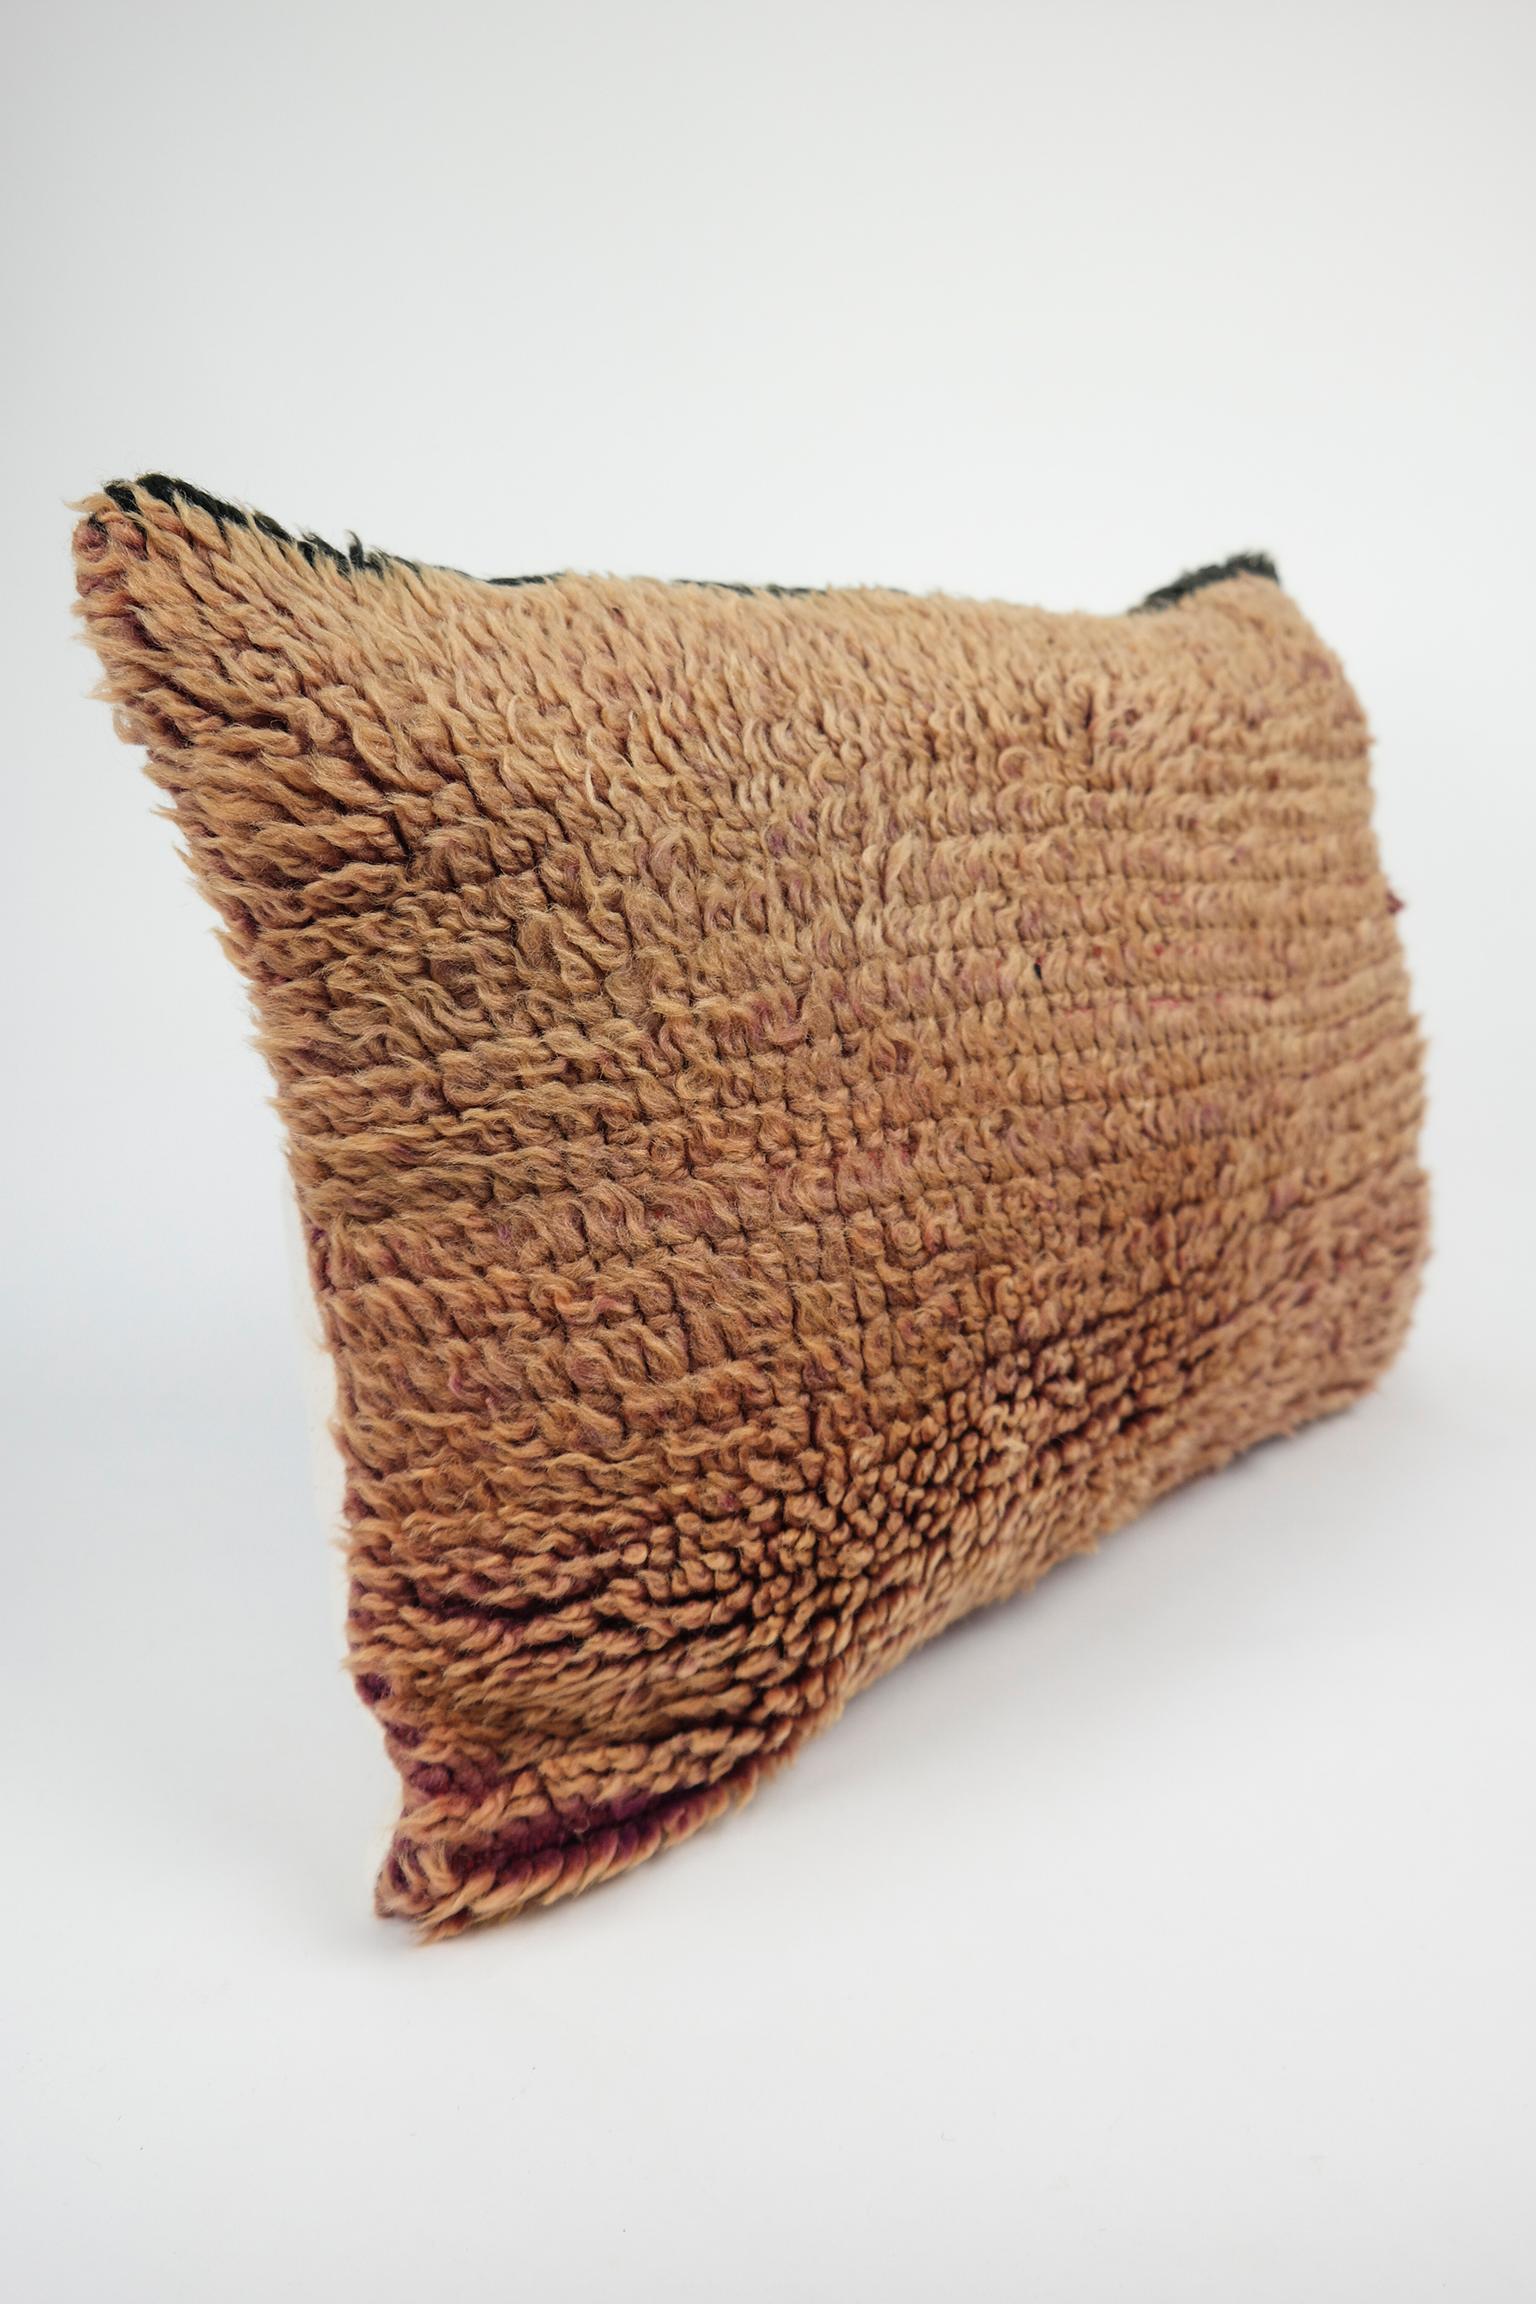 Cushion custom-made from a more than 40 years old Moroccan rug, searched and selected by ourselves. This pillow is a one-of-a-kind with beautiful warm colors. The beauty of our pillows is that they are timeless and blend in every interior. Or